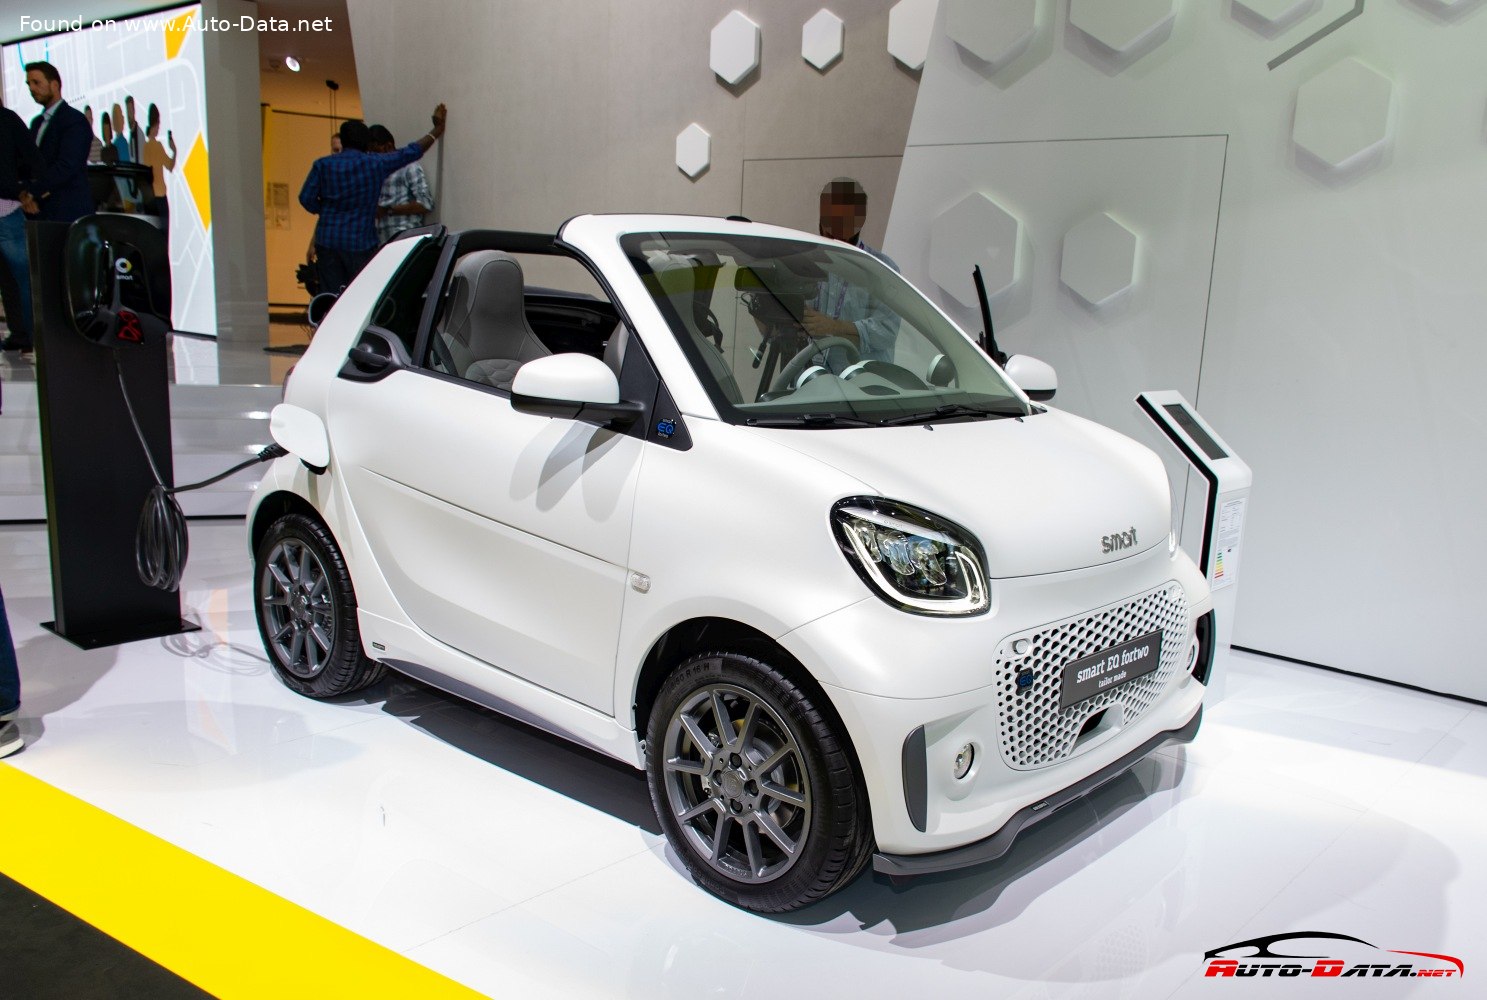 2020 Smart EQ fortwo cabrio (A453, facelift, 2019) 17.2 kWh (82 Hp